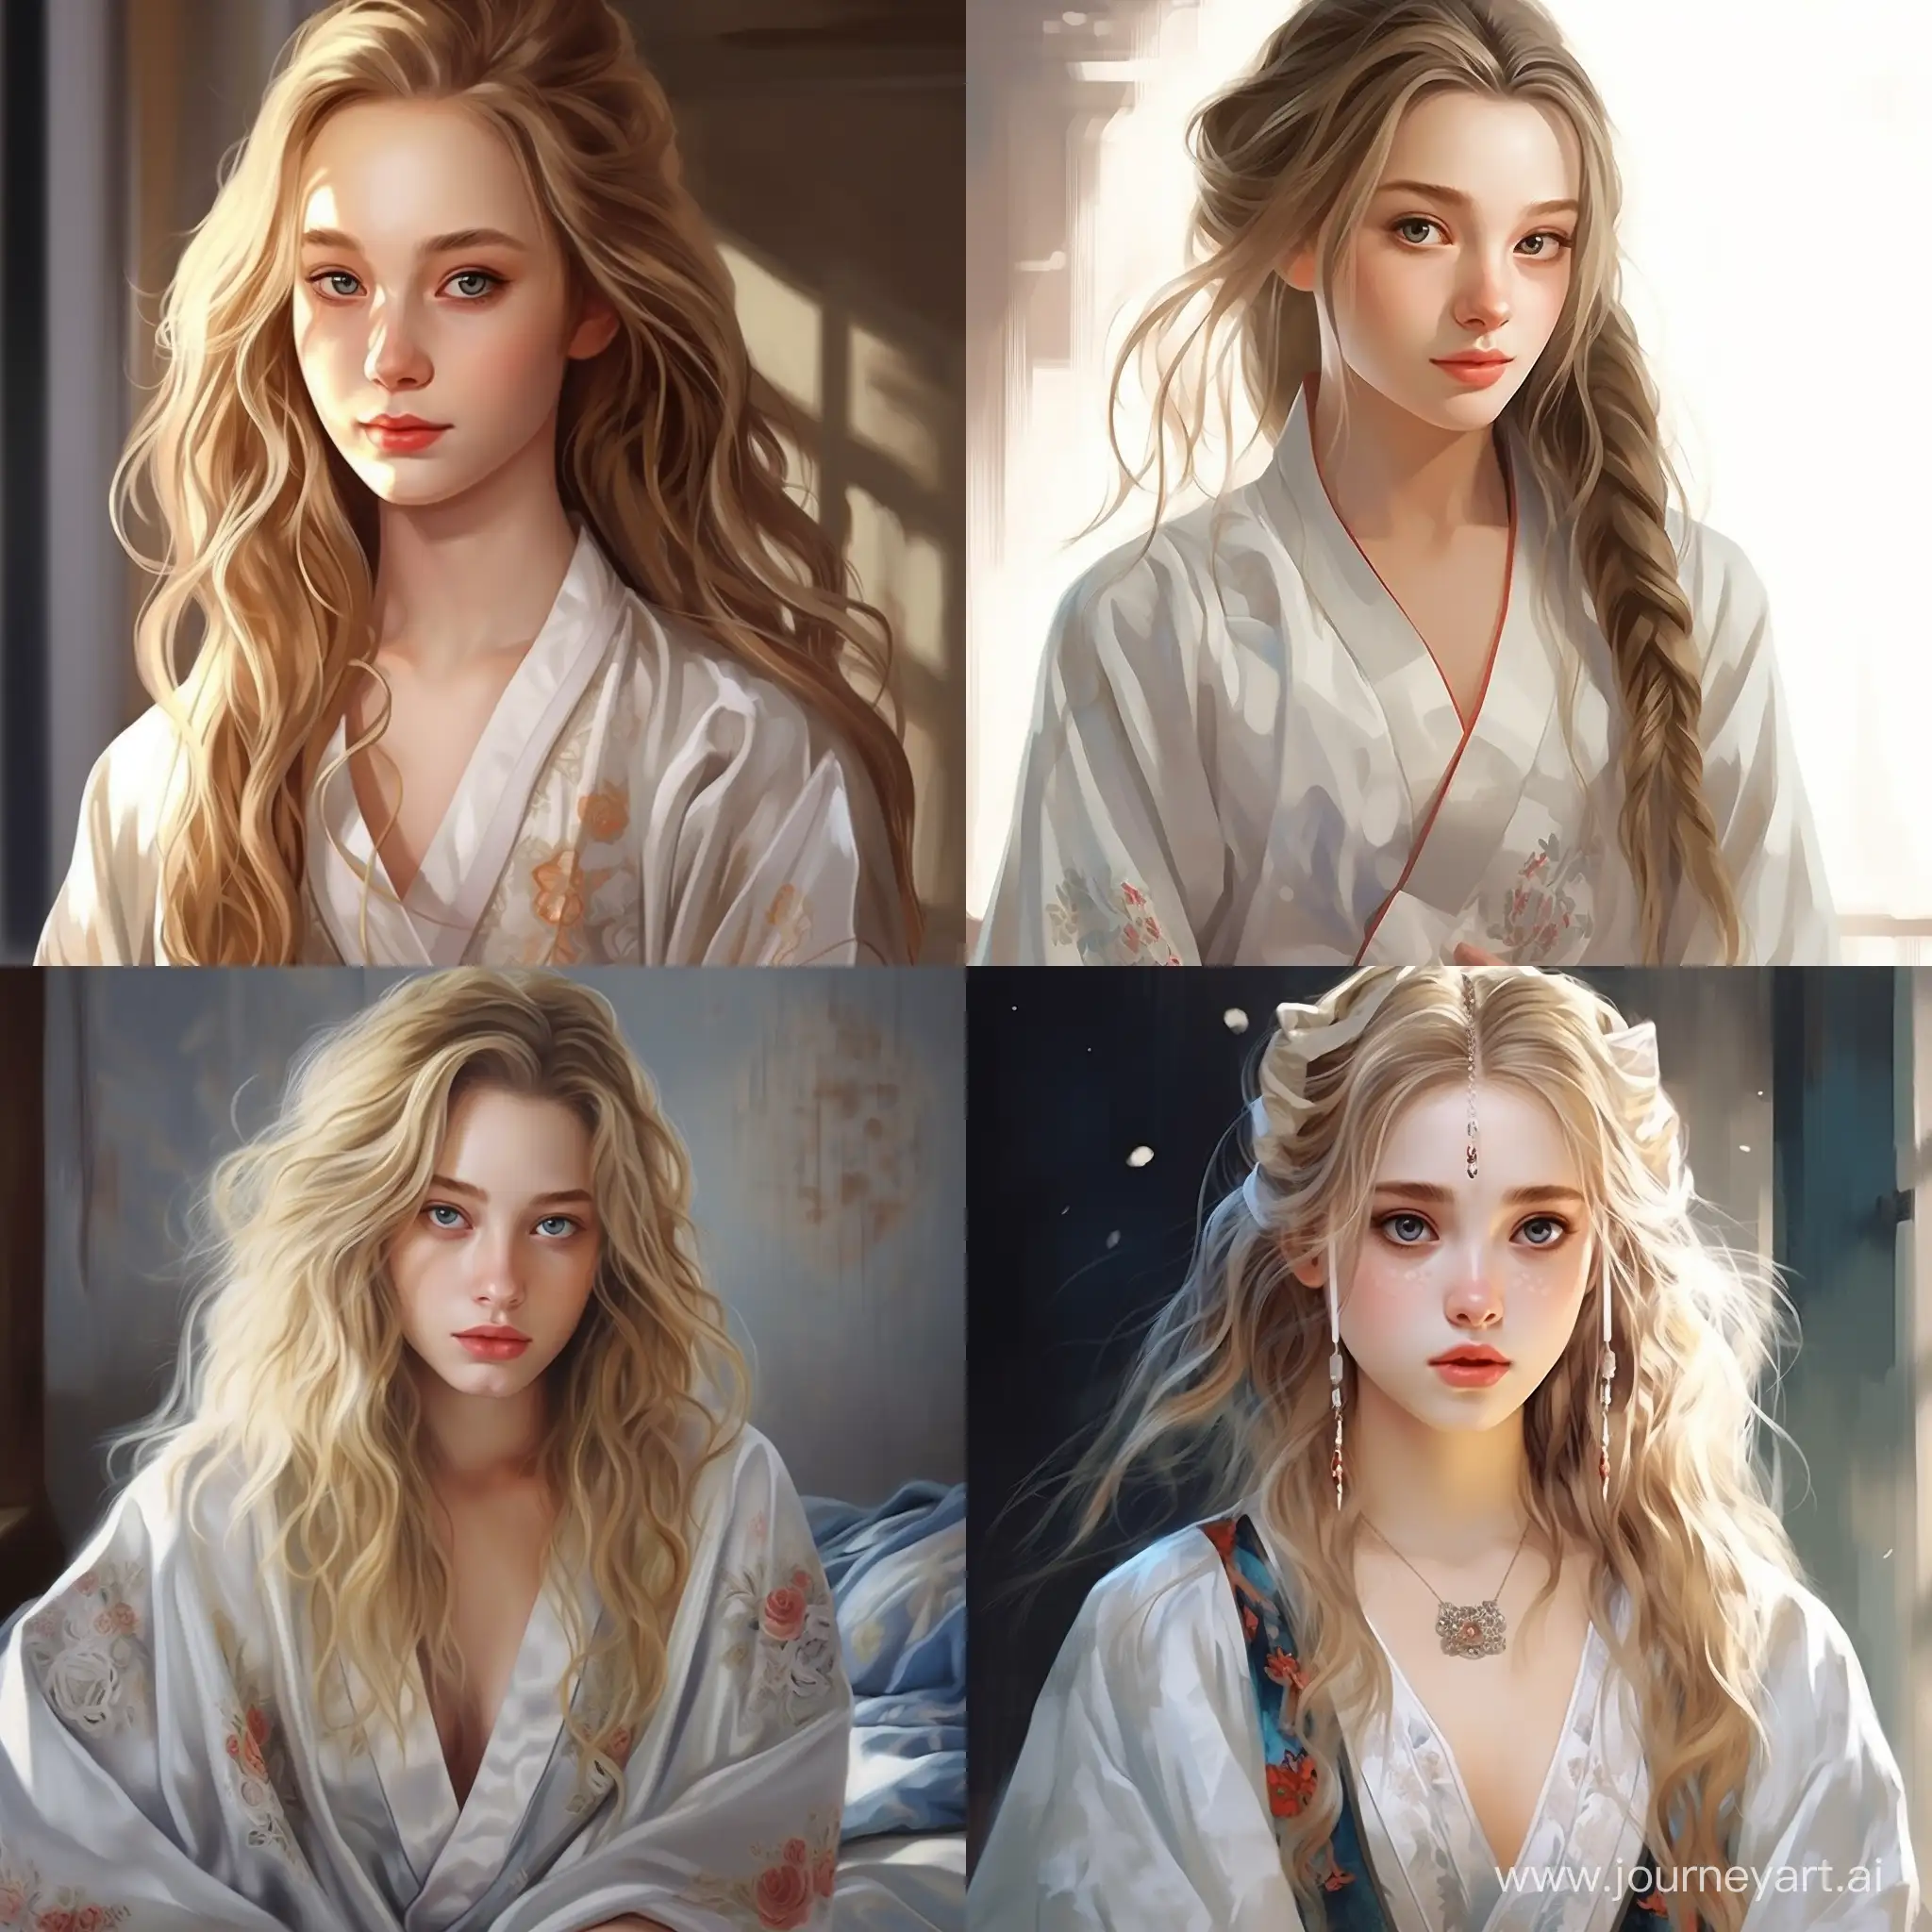 Beautiful girl, straight golden hair, gray-blue eyes, snow-white skin, teenager, summer, in traditional Chinese robes, cute, cozy, high quality, high detail, cartoon art